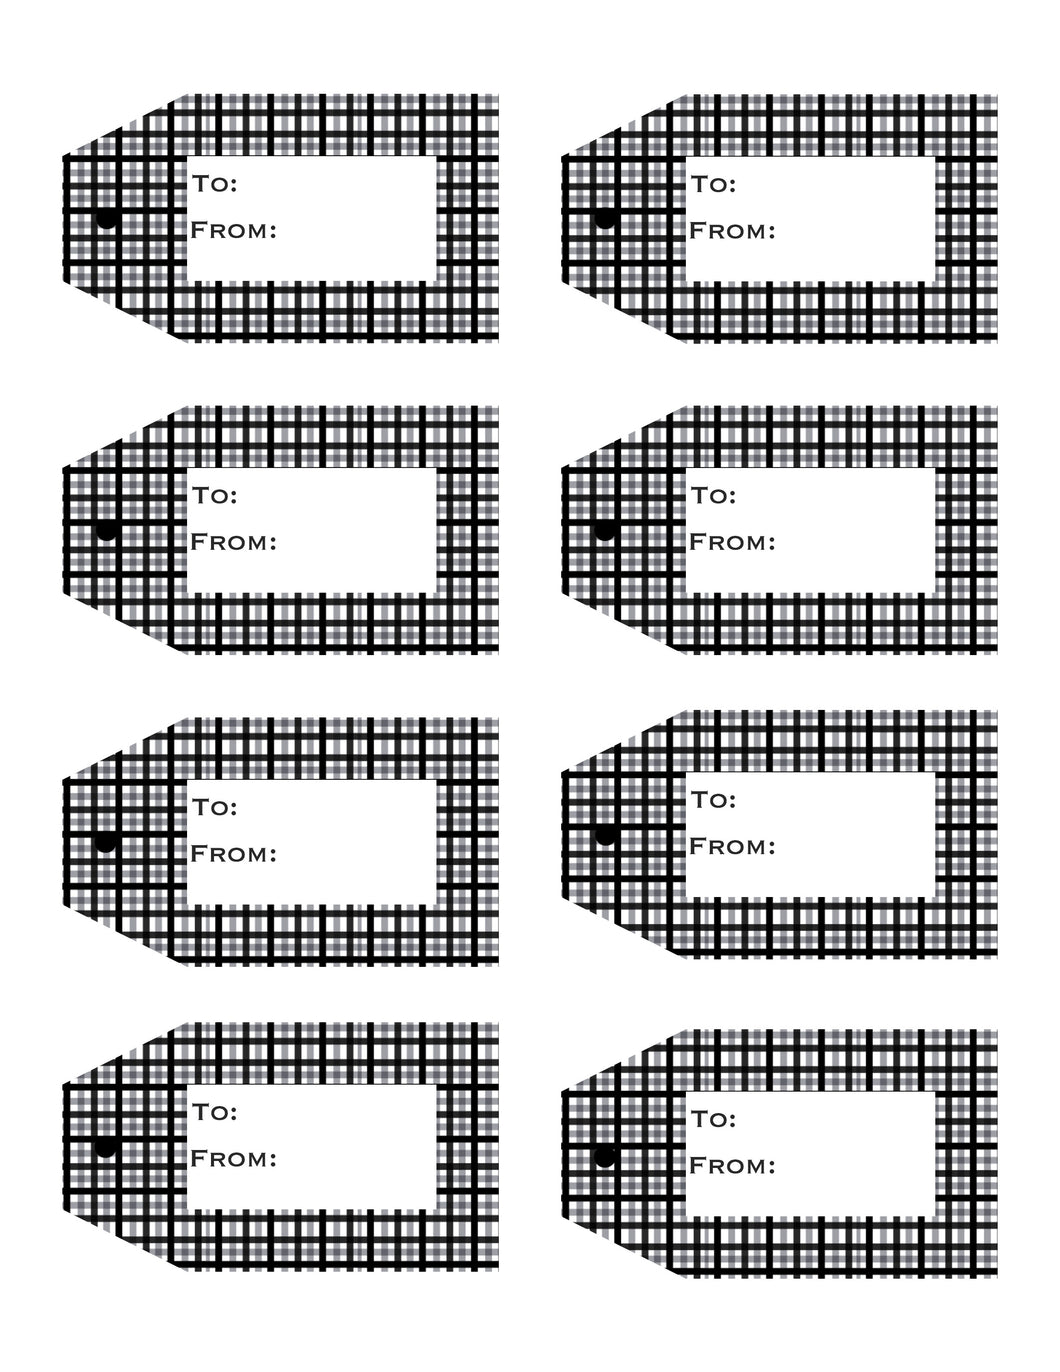 Plaid Printable Gift Tags Volume 1 {10 different Patterns - 80 Tags}